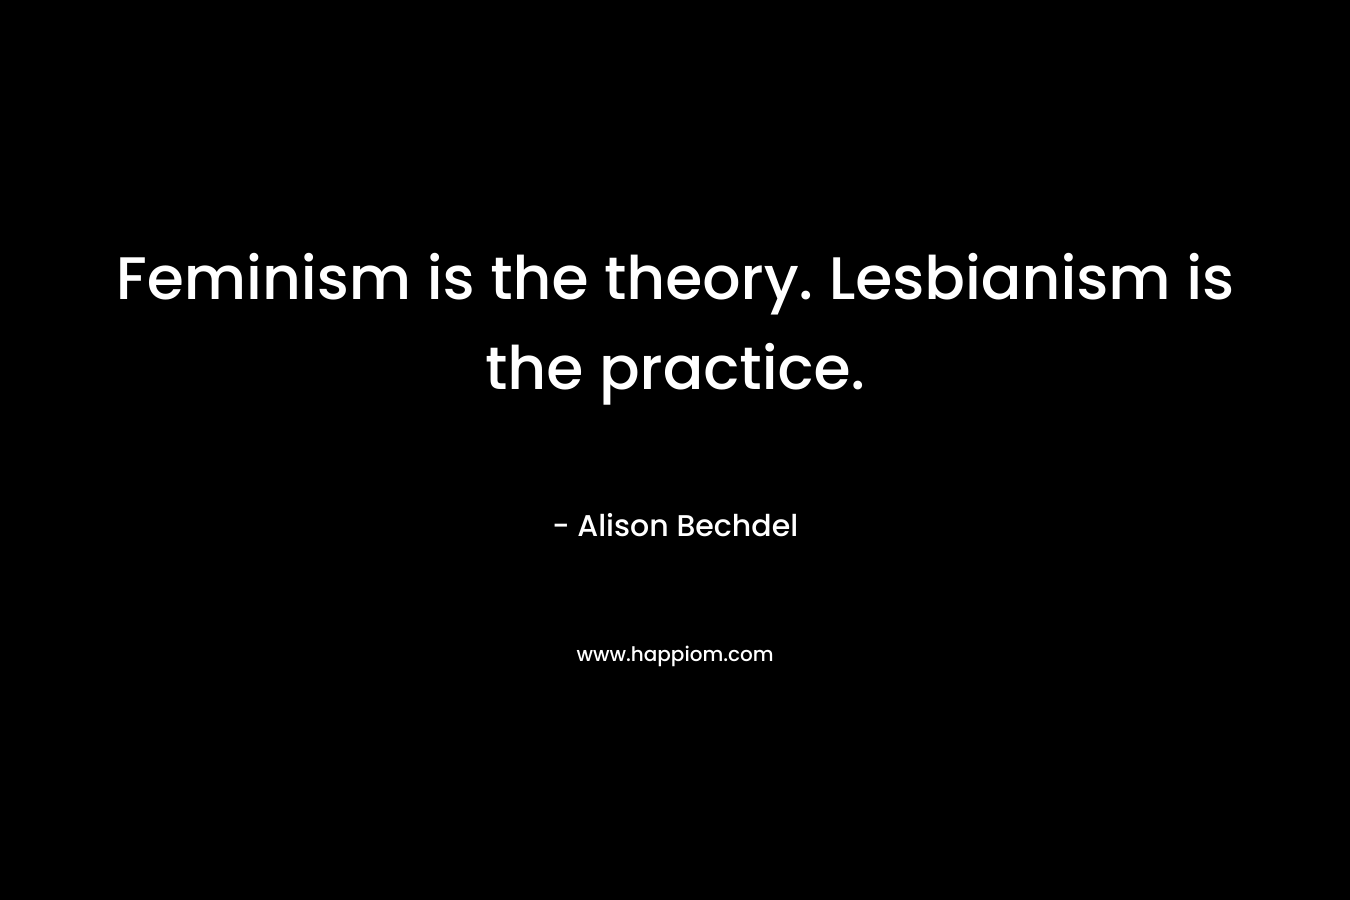 Feminism is the theory. Lesbianism is the practice. – Alison Bechdel